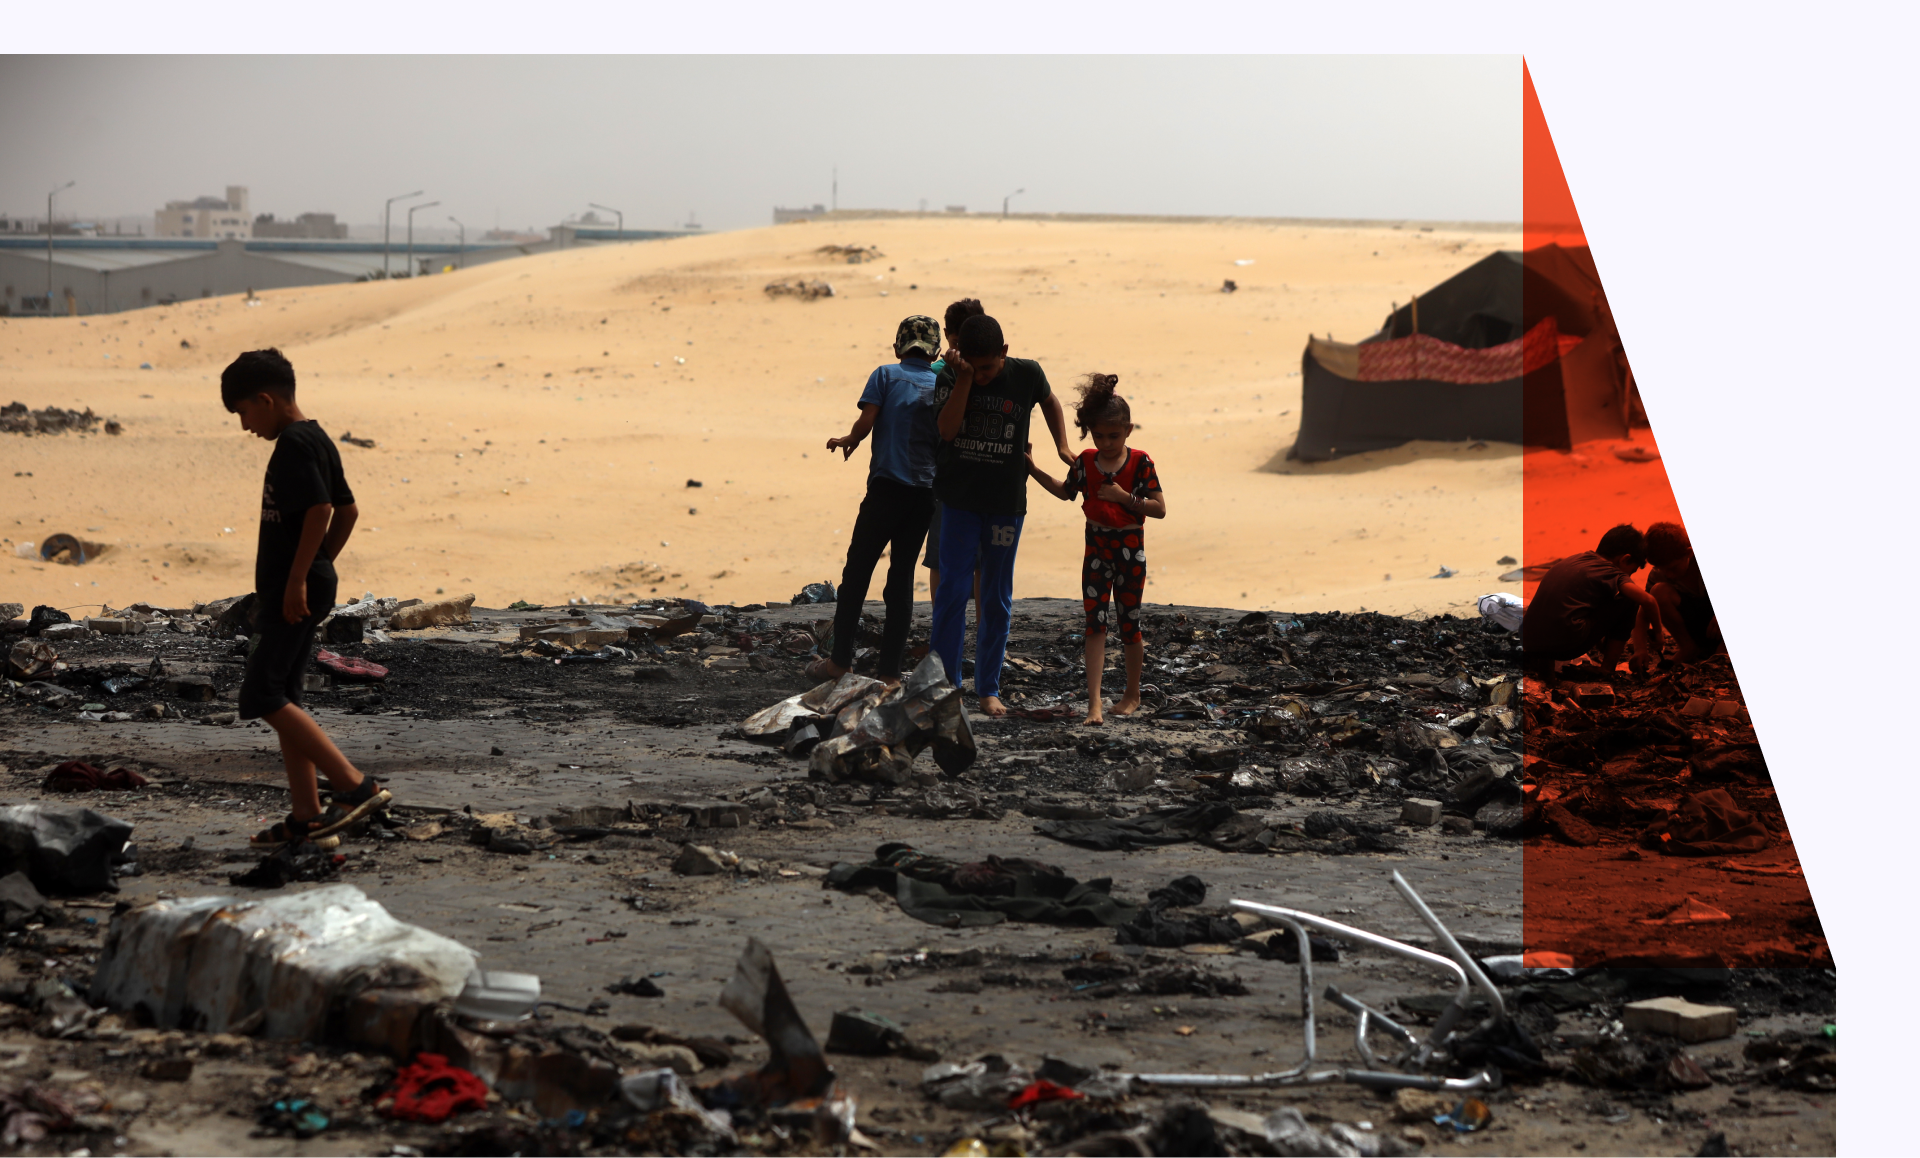 Children in what's left of burned tents in Rafah